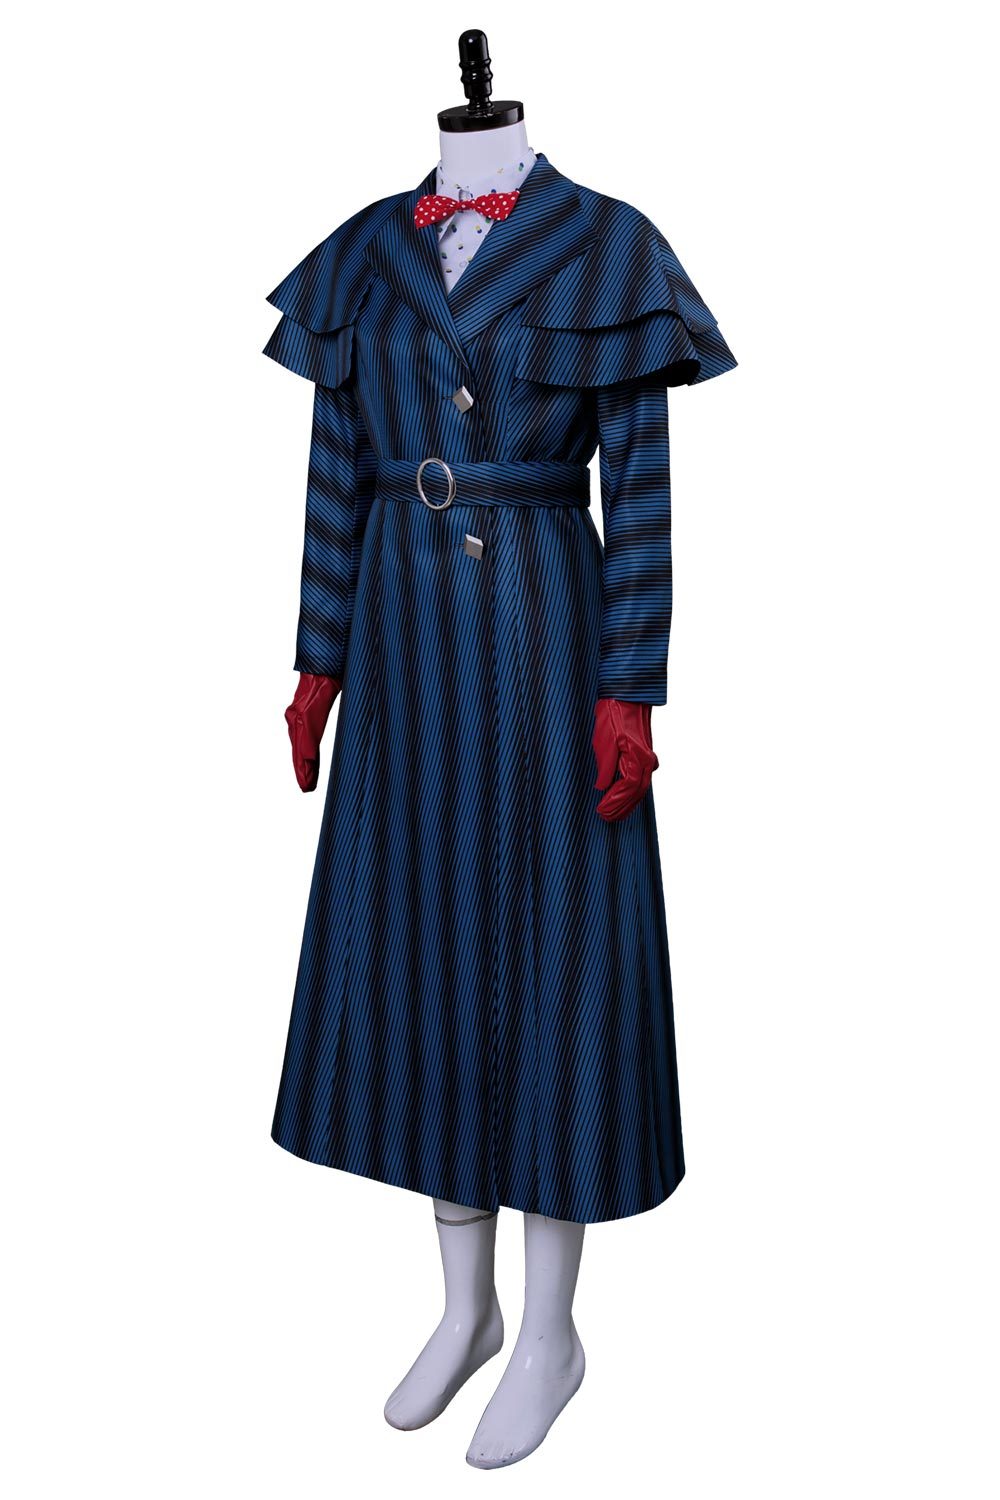 2018 Mary Poppins Returns Costume Mary Poppins Dress Hat For Adult